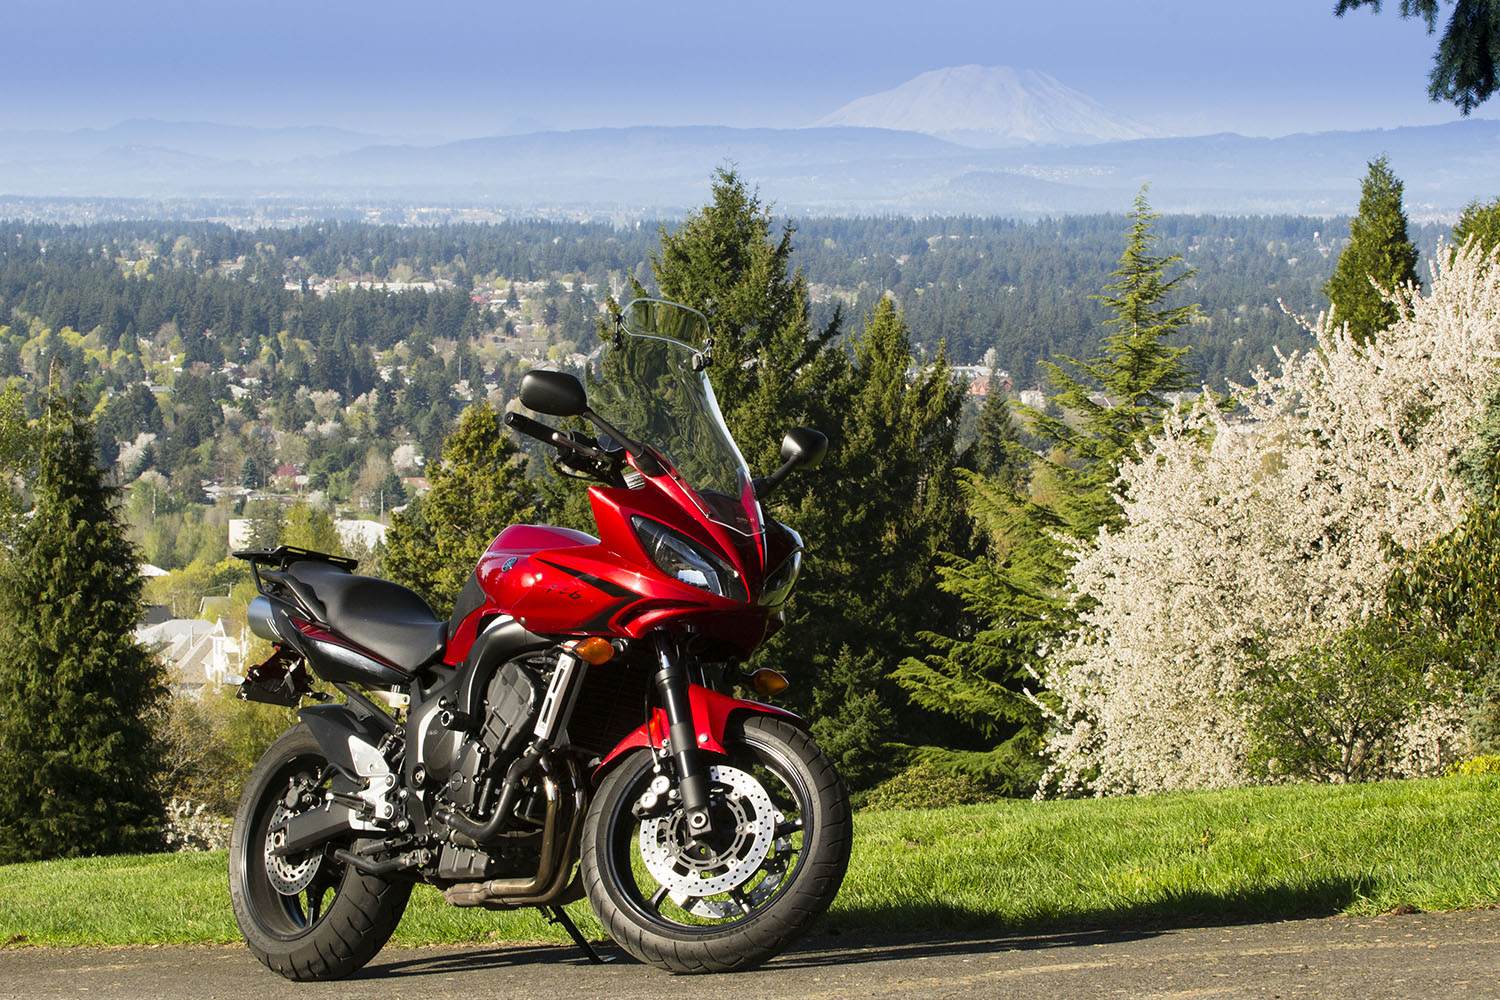 FZ6 featuring Mount St. Helens